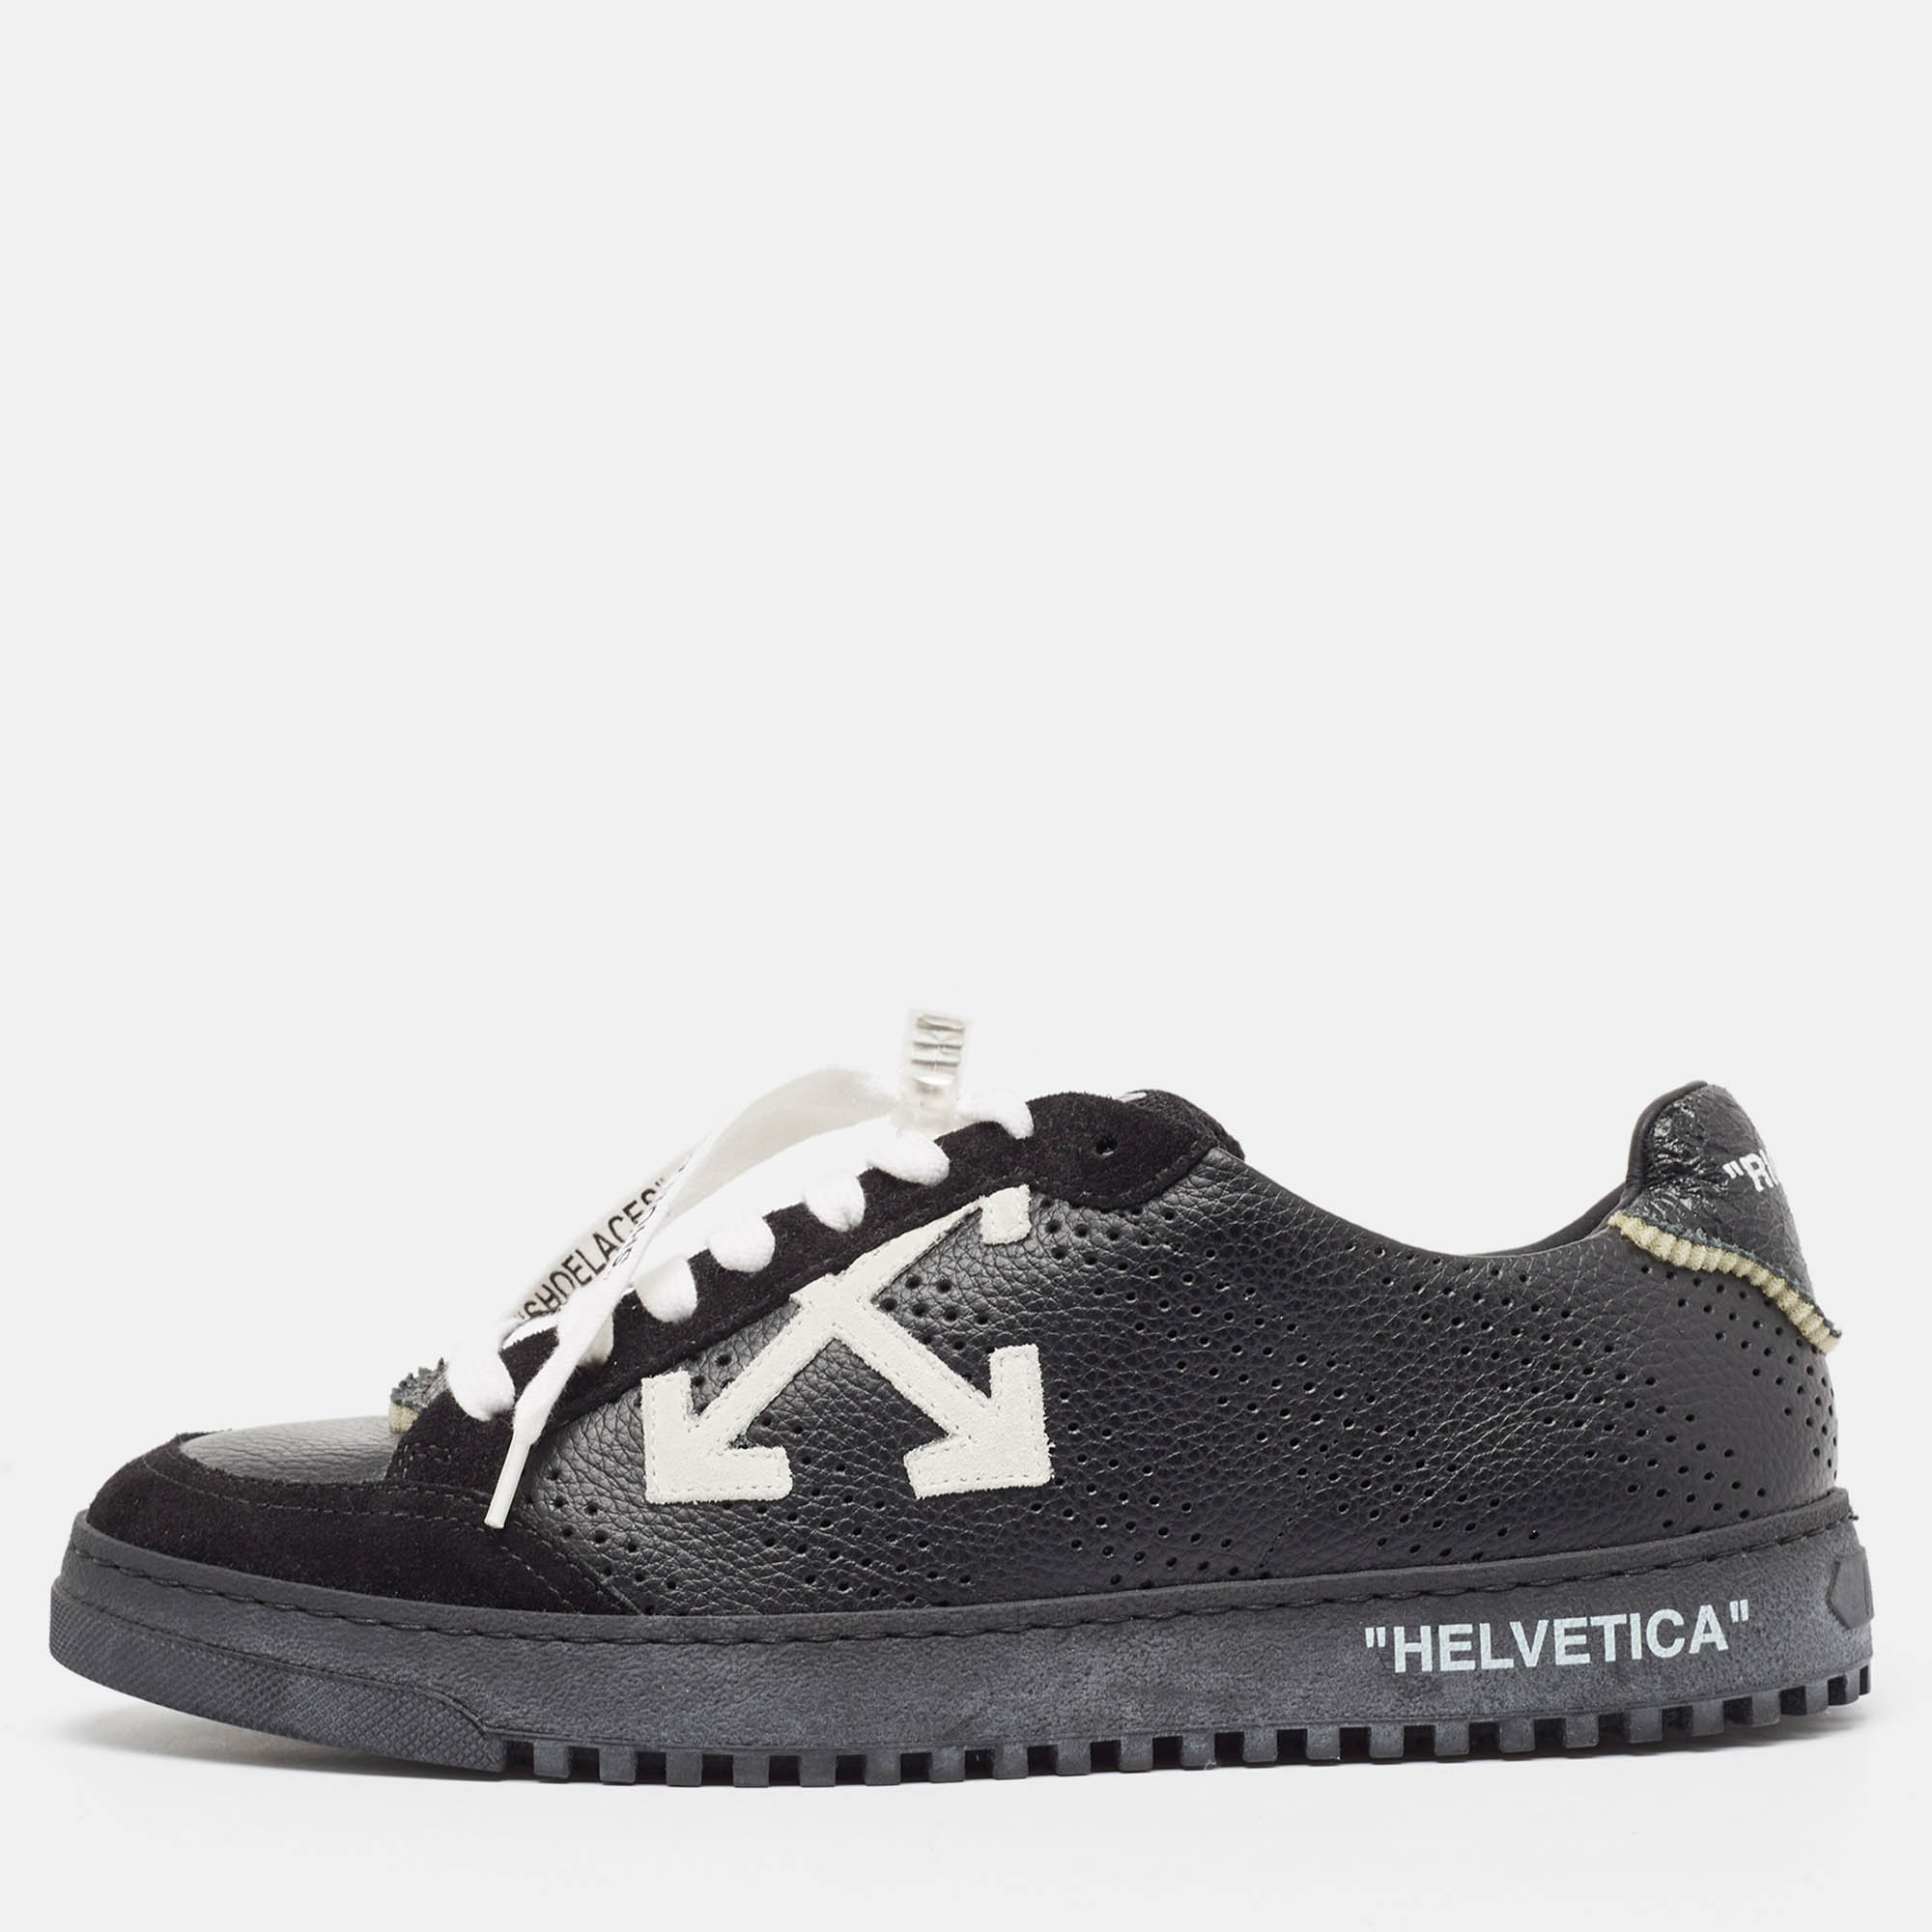 Off-white leather and suede 'helvetica' sneakers size 40